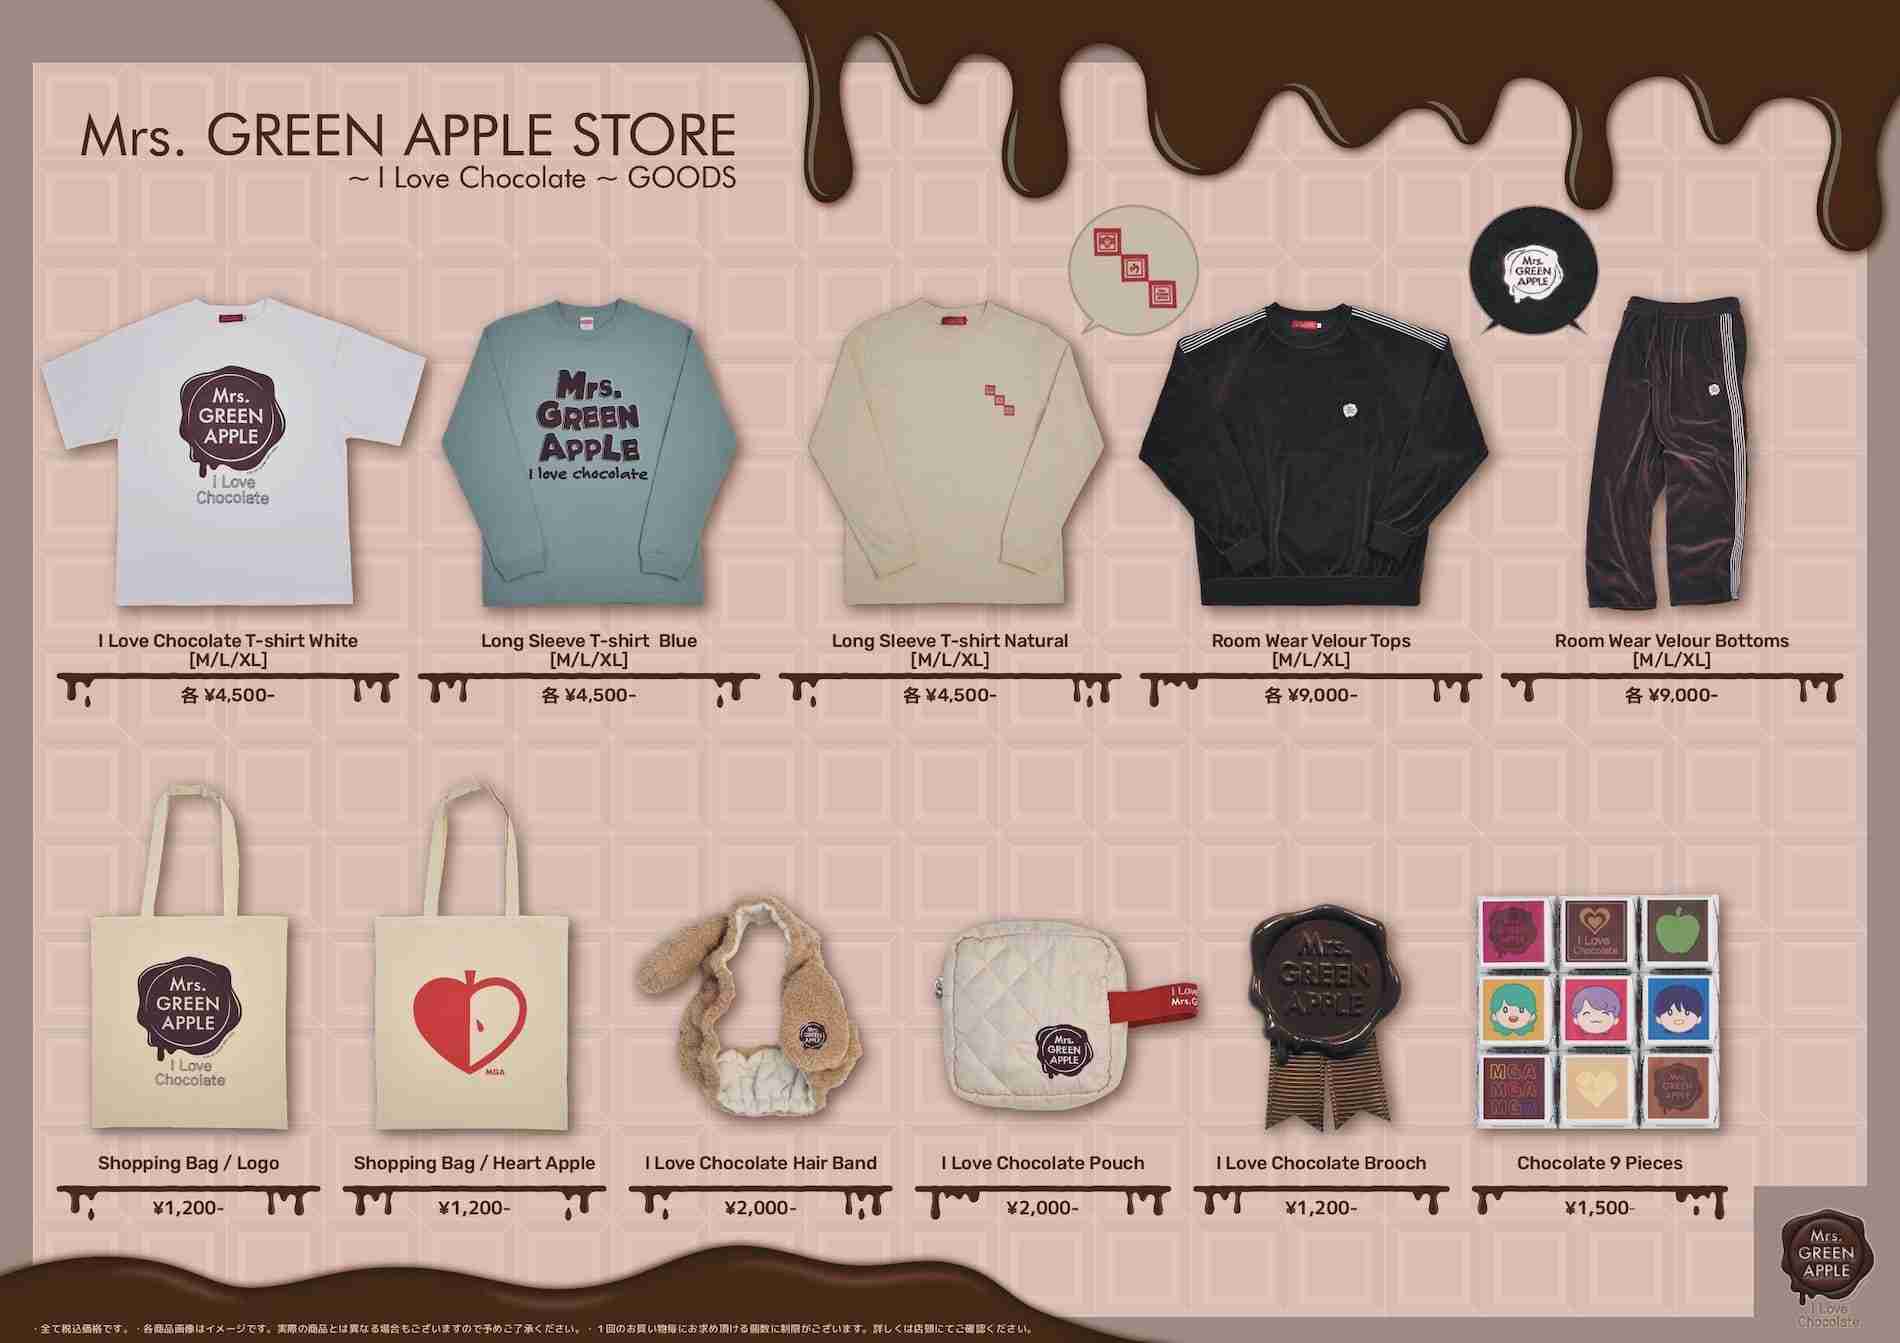 Mrs. GREEN APPLE's POP-UP STORE “Mrs GREEN APPLE STORE” additional 